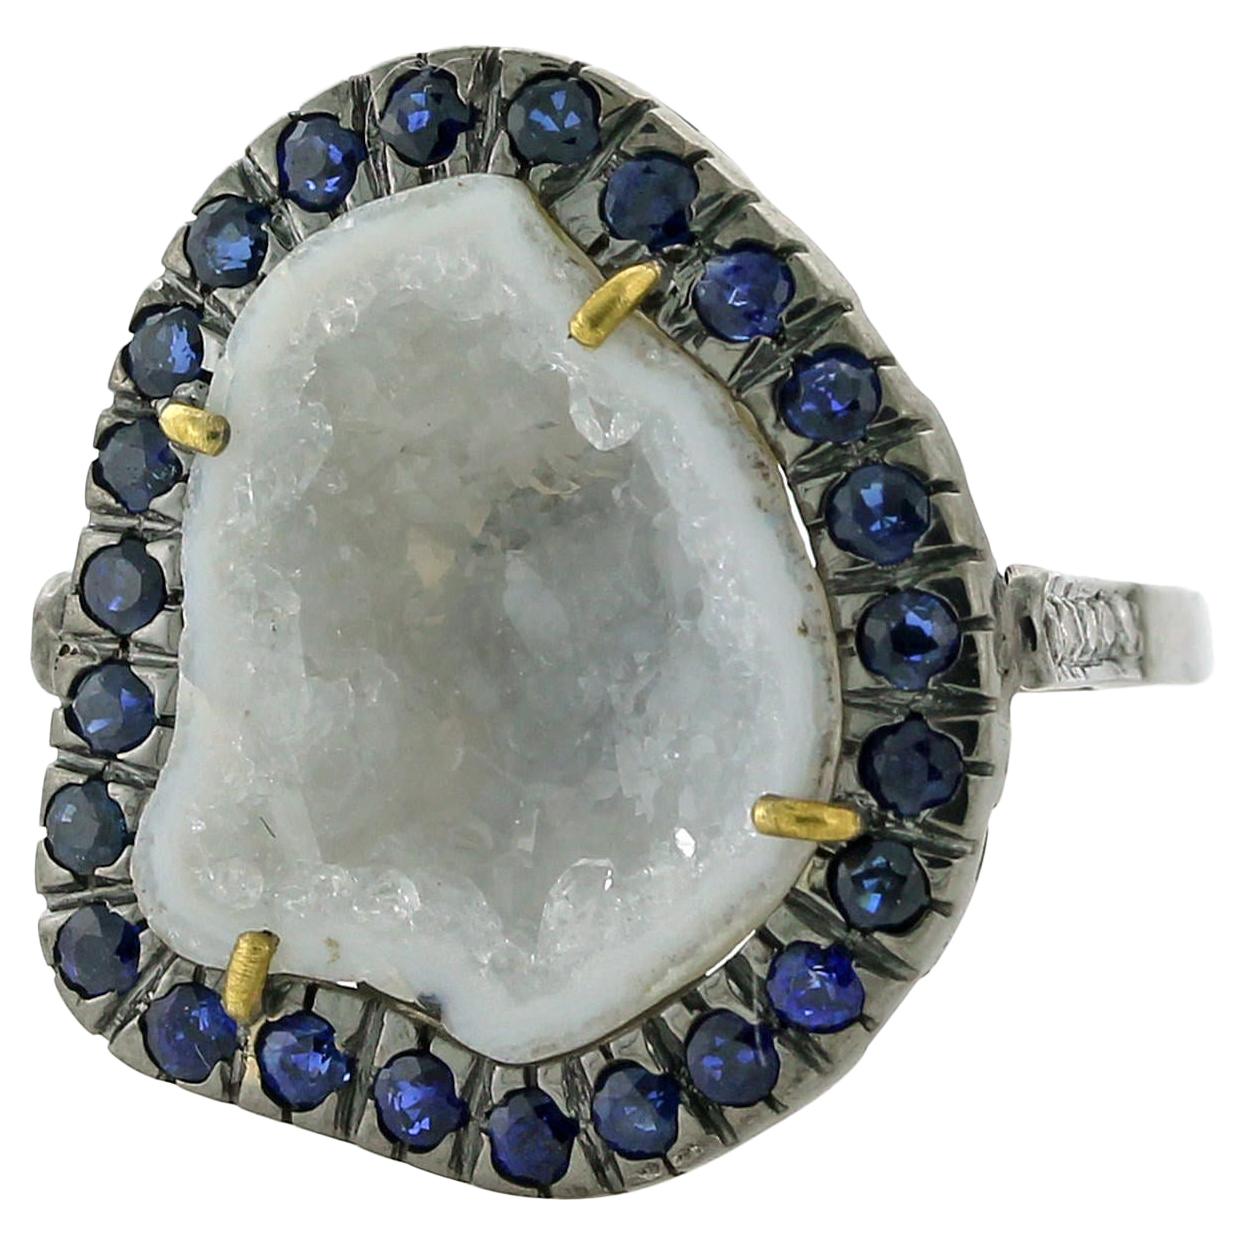 One of a Kind White Geode with Diamonds and Sapphire Set in Gold and Silver